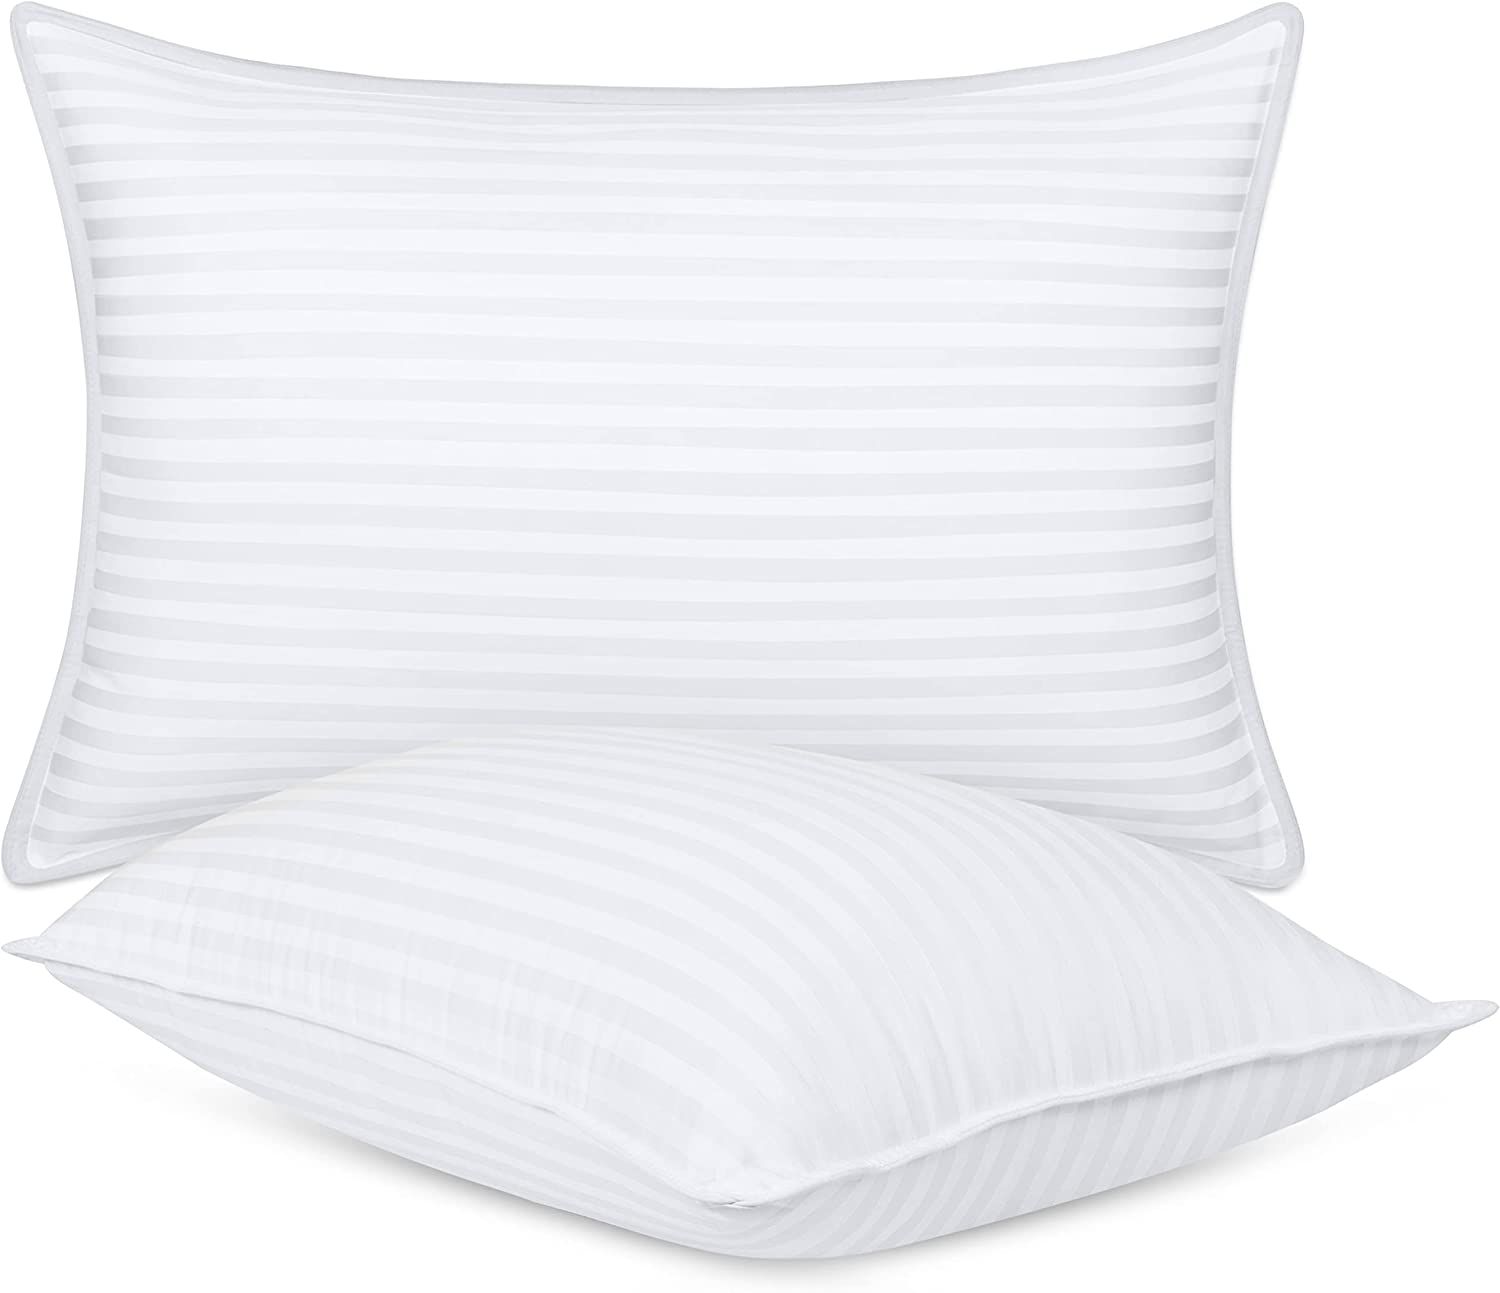 Utopia Bedding Bed Pillows for Sleeping Queen Size (White), Set of 2, Cooling Hotel Quality, for ... | Amazon (US)